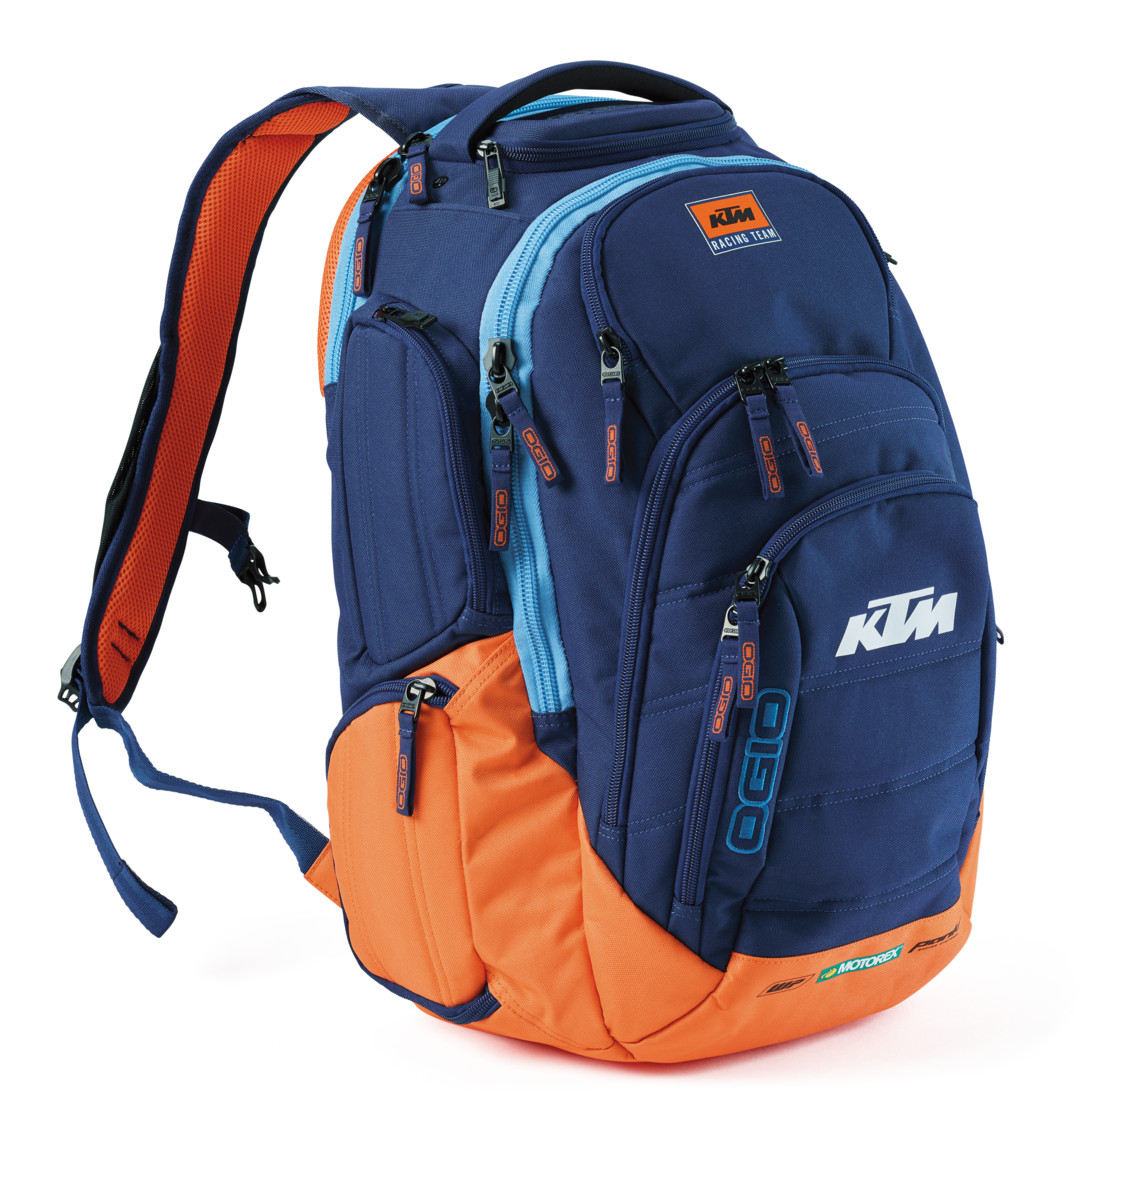 Main image of 2020 KTM Team Renegade Backpack by Ogio